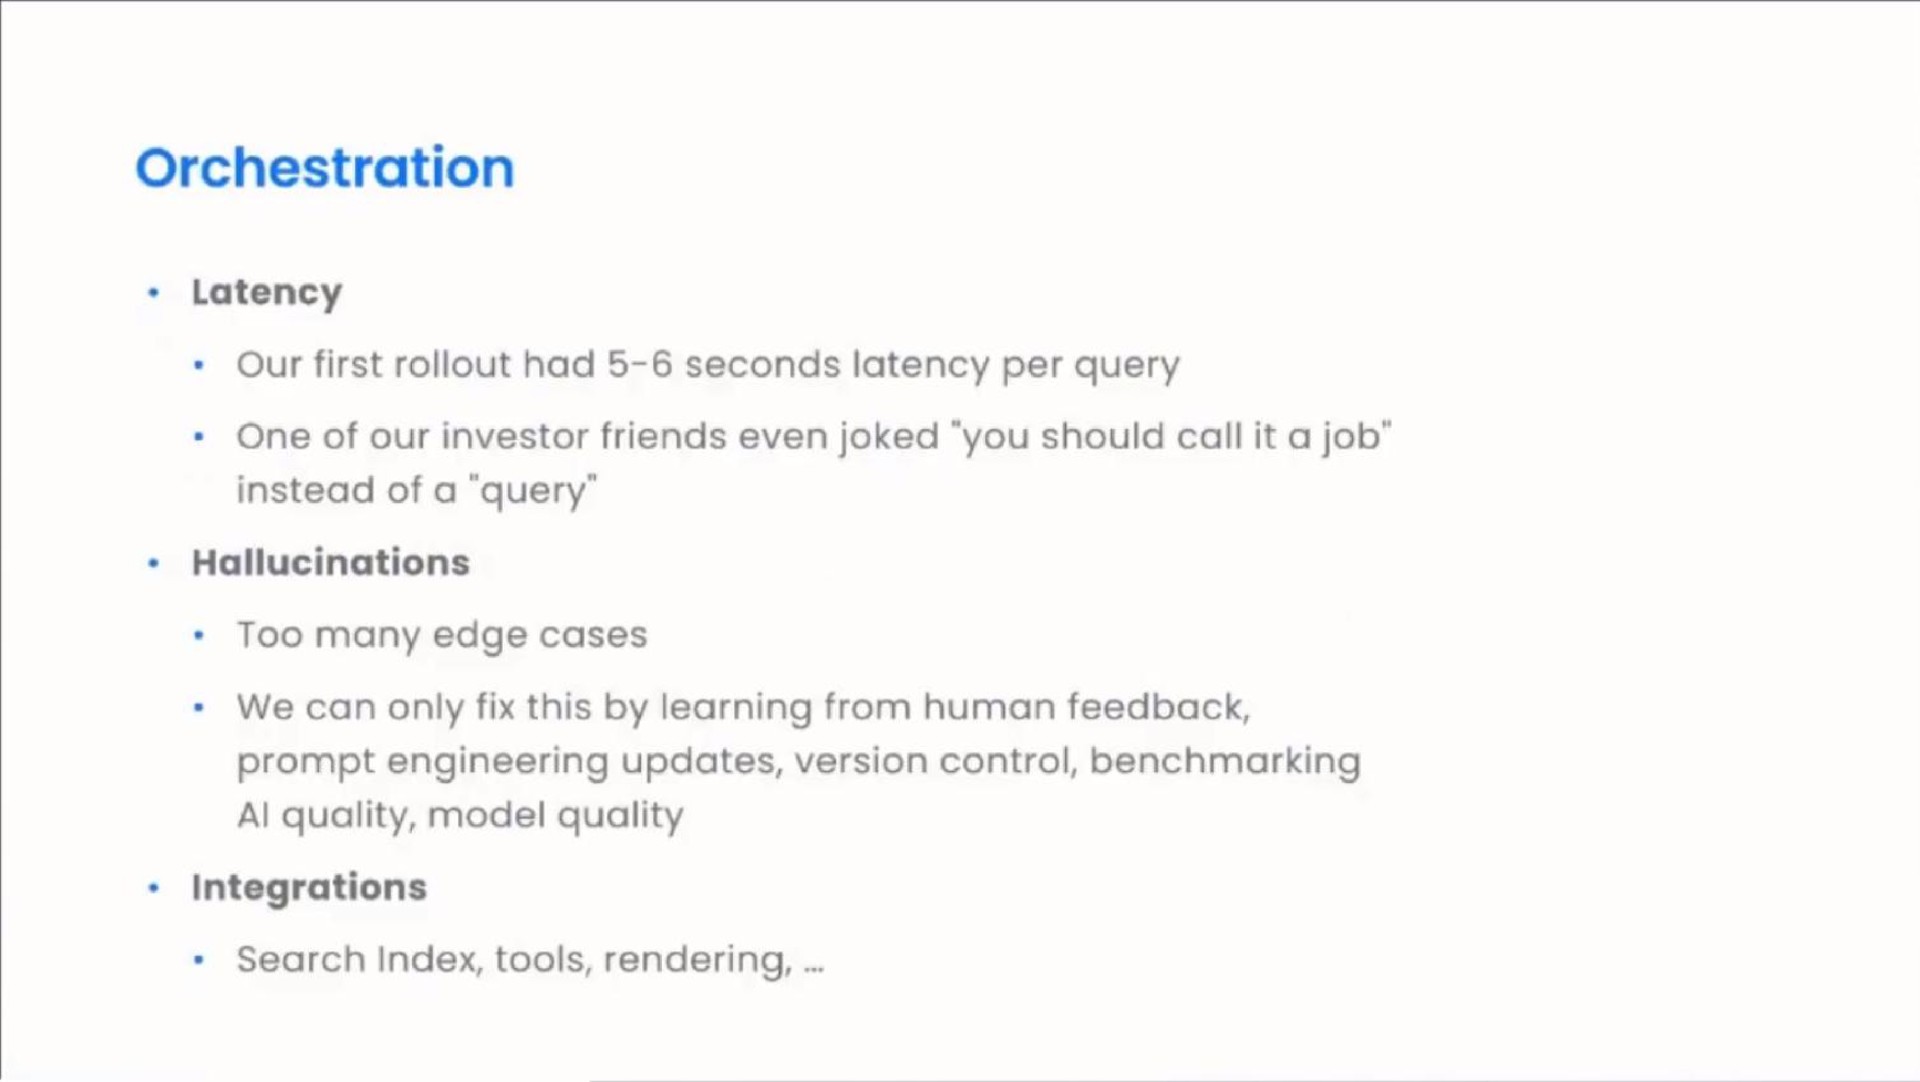 orchestration latency our first had seconds latency per query one of our investor friends even joked you should call it a job instead of a query only fix this by learning from human feedback prompt engineering updates version control integrations | Perplexity AI